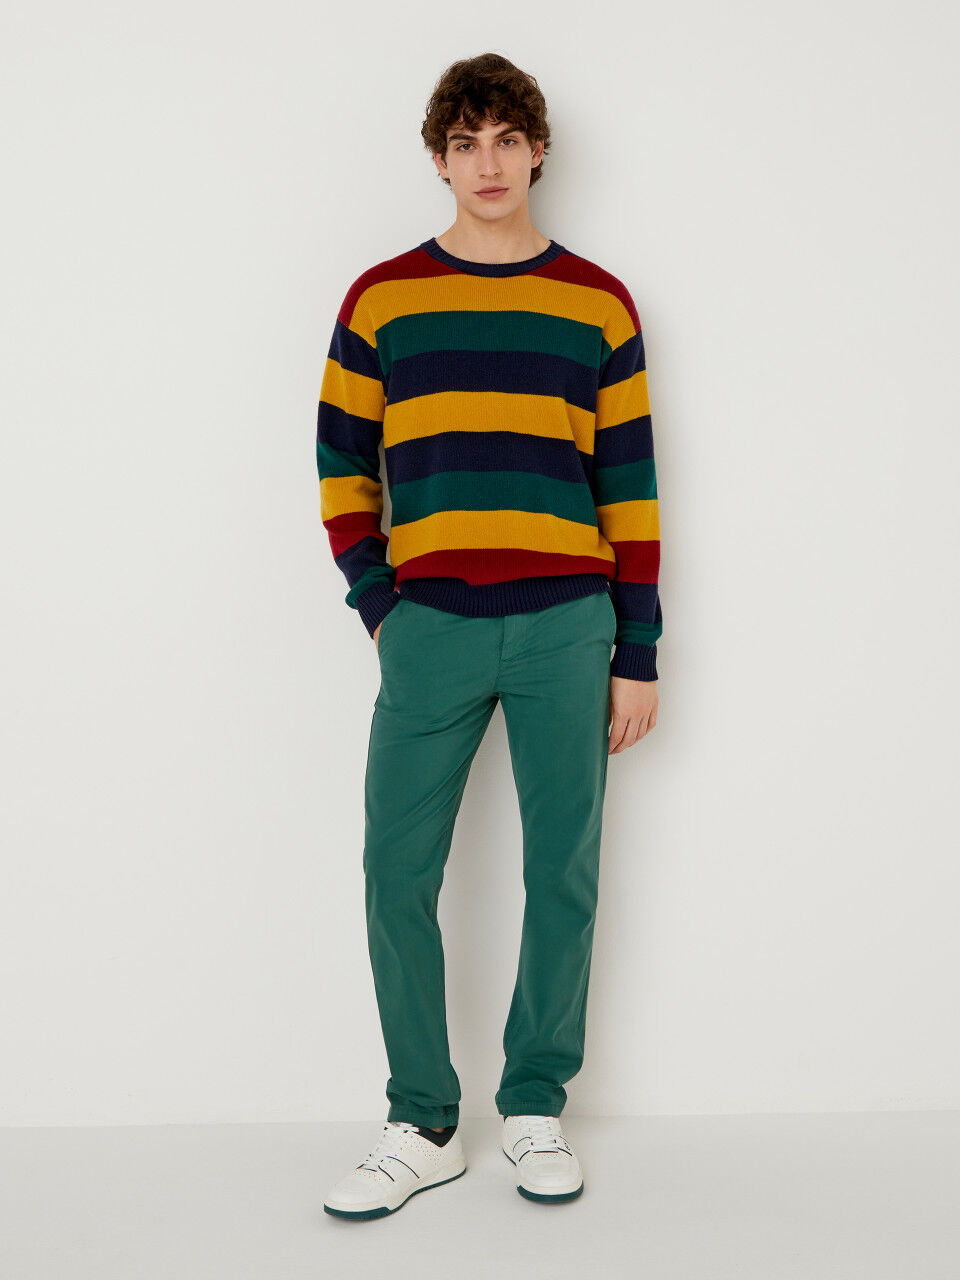 United Colors Of Benetton Casual Trousers  Buy United Colors Of Benetton  Solid Trousers Online  Nykaa Fashion